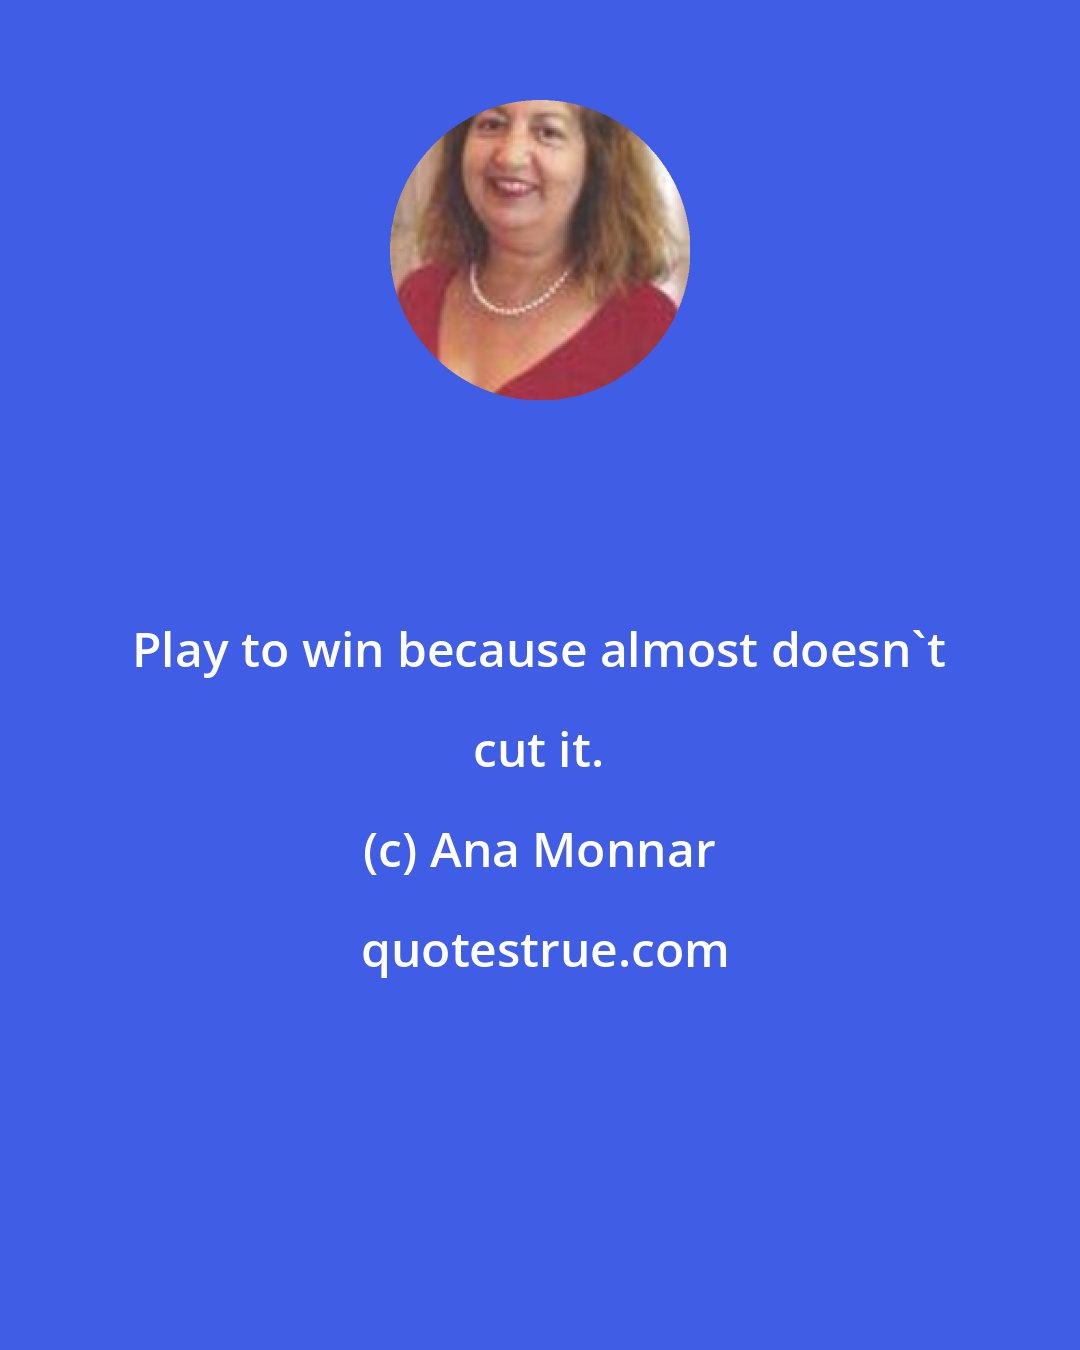 Ana Monnar: Play to win because almost doesn't cut it.